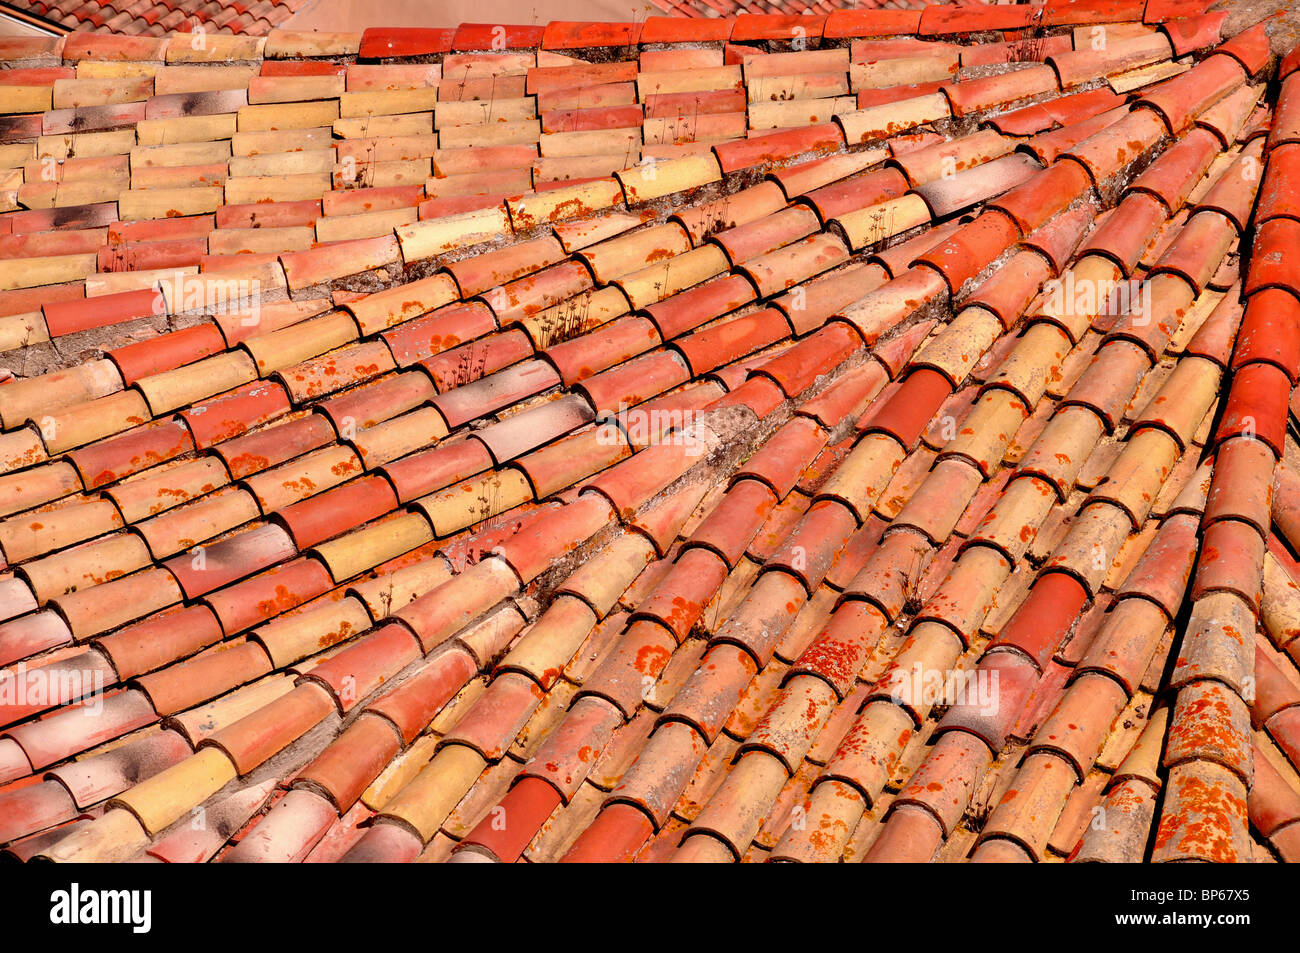 Abstract detail of a red tiled roof - Gerona, Spain. Stock Photo